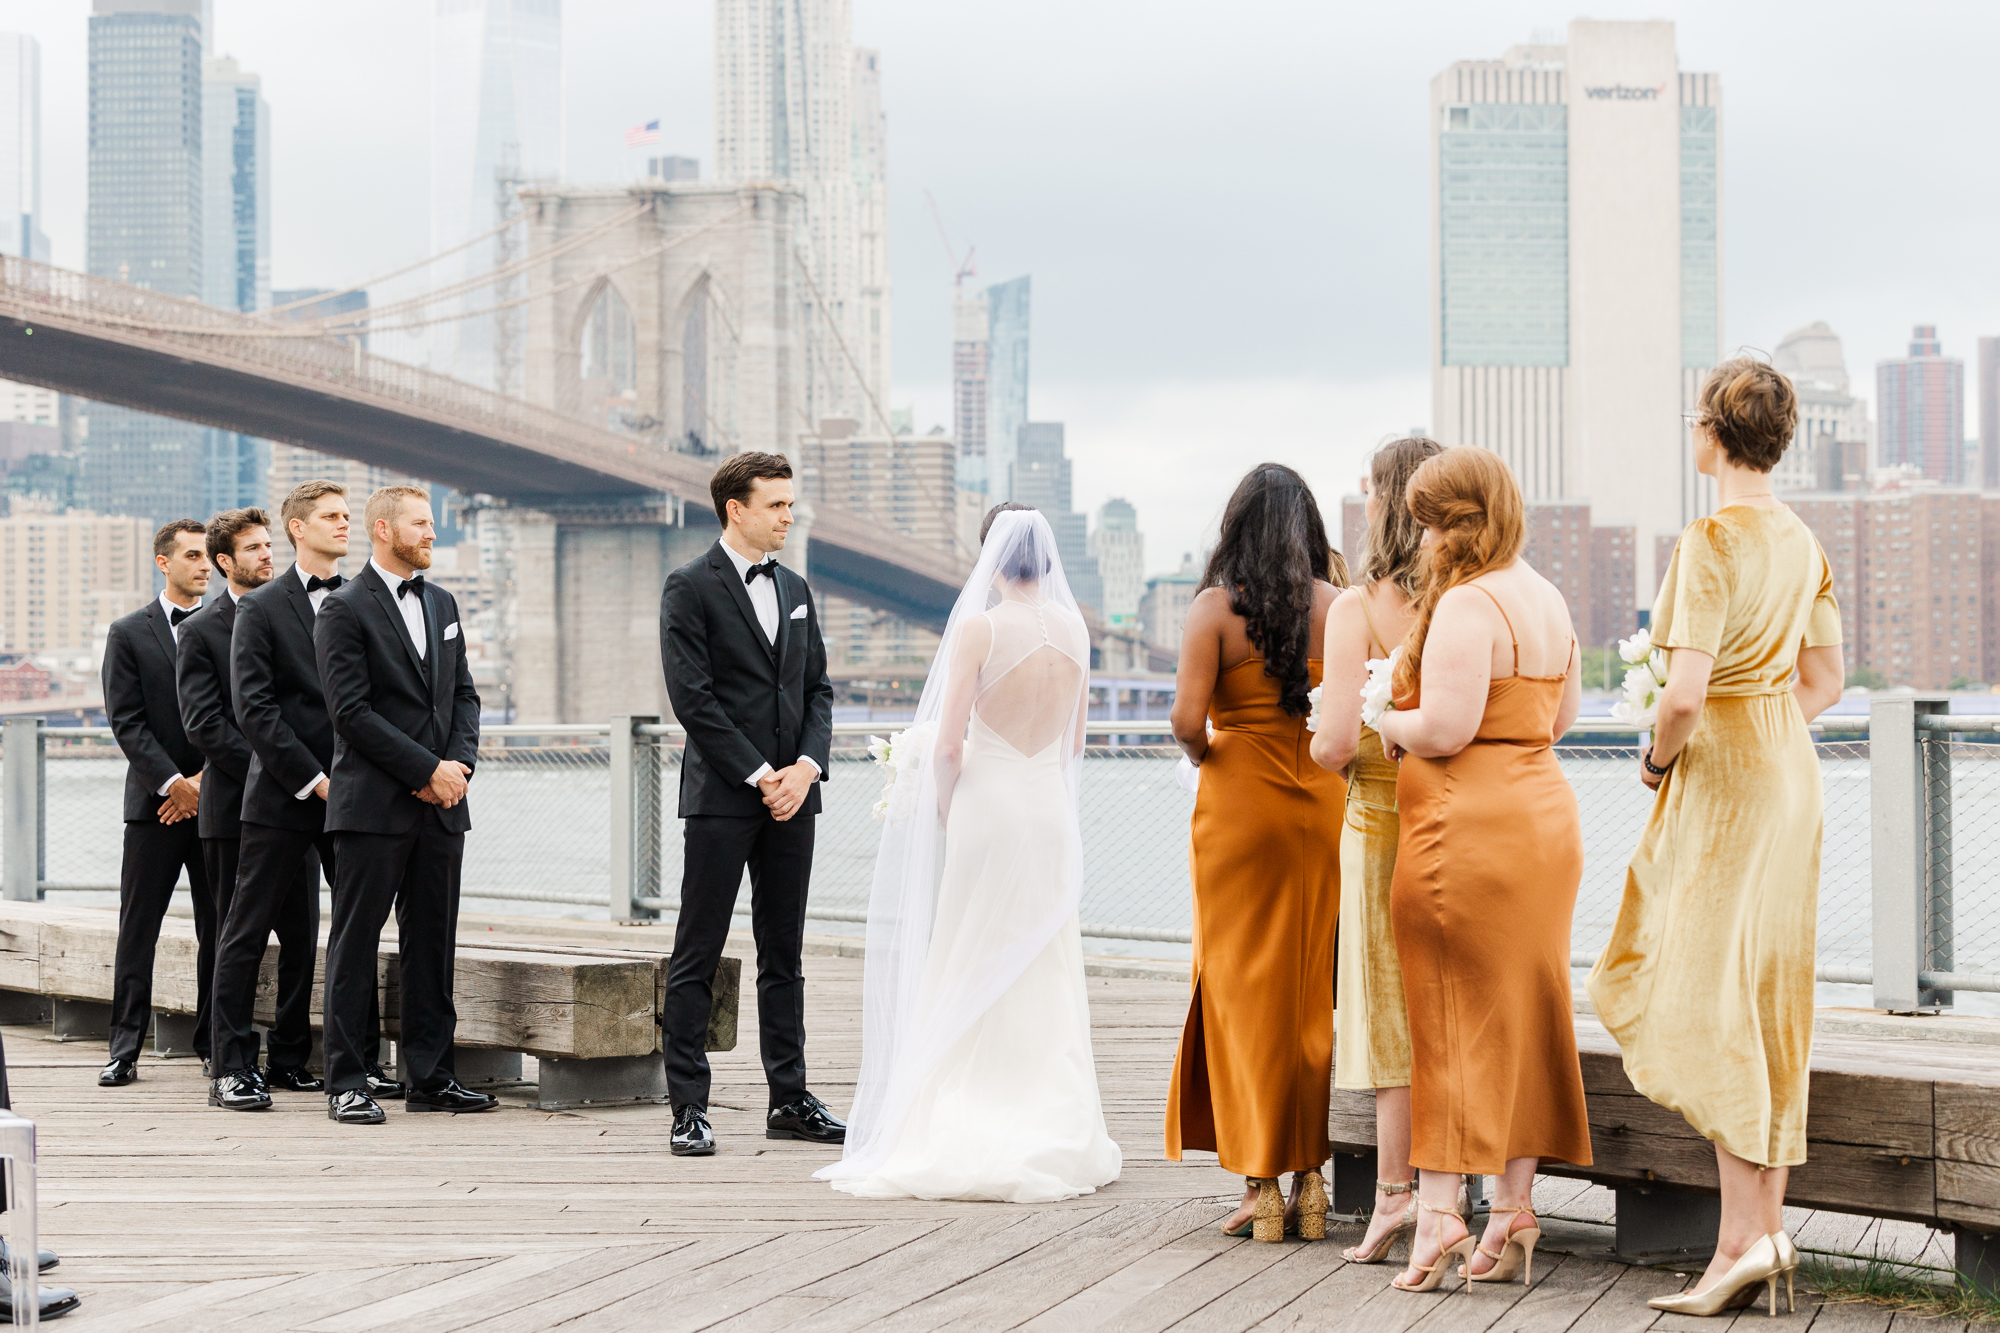 Colorful DUMBO, Brooklyn Wedding Photos at Smack Mellon and Jane's Carousel